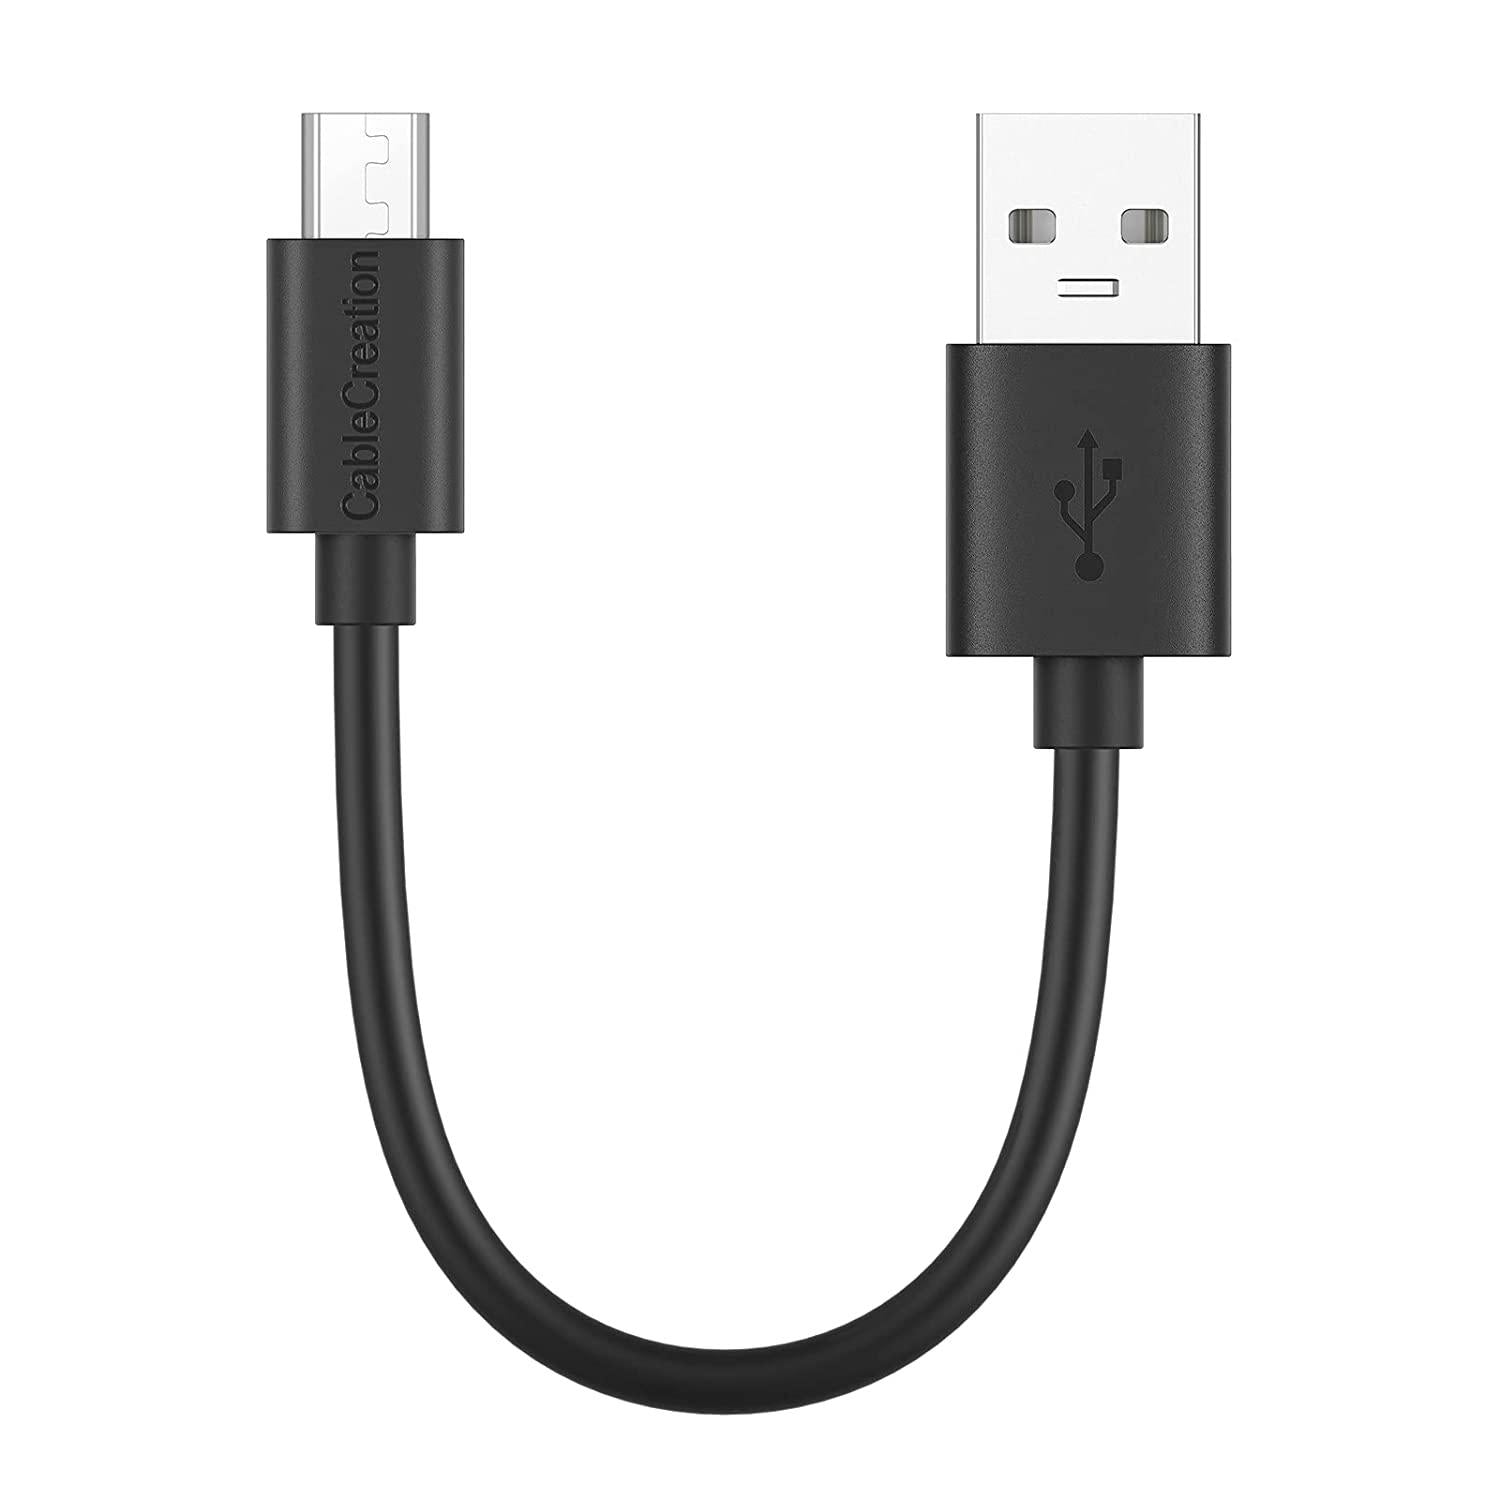 CableCreation, Micro USB Cable, CableCreation Short USB 2.0 to Micro USB Cable, High-Speed A Male to Micro B, Triple Shielded Cable, 6 Inch Black Color